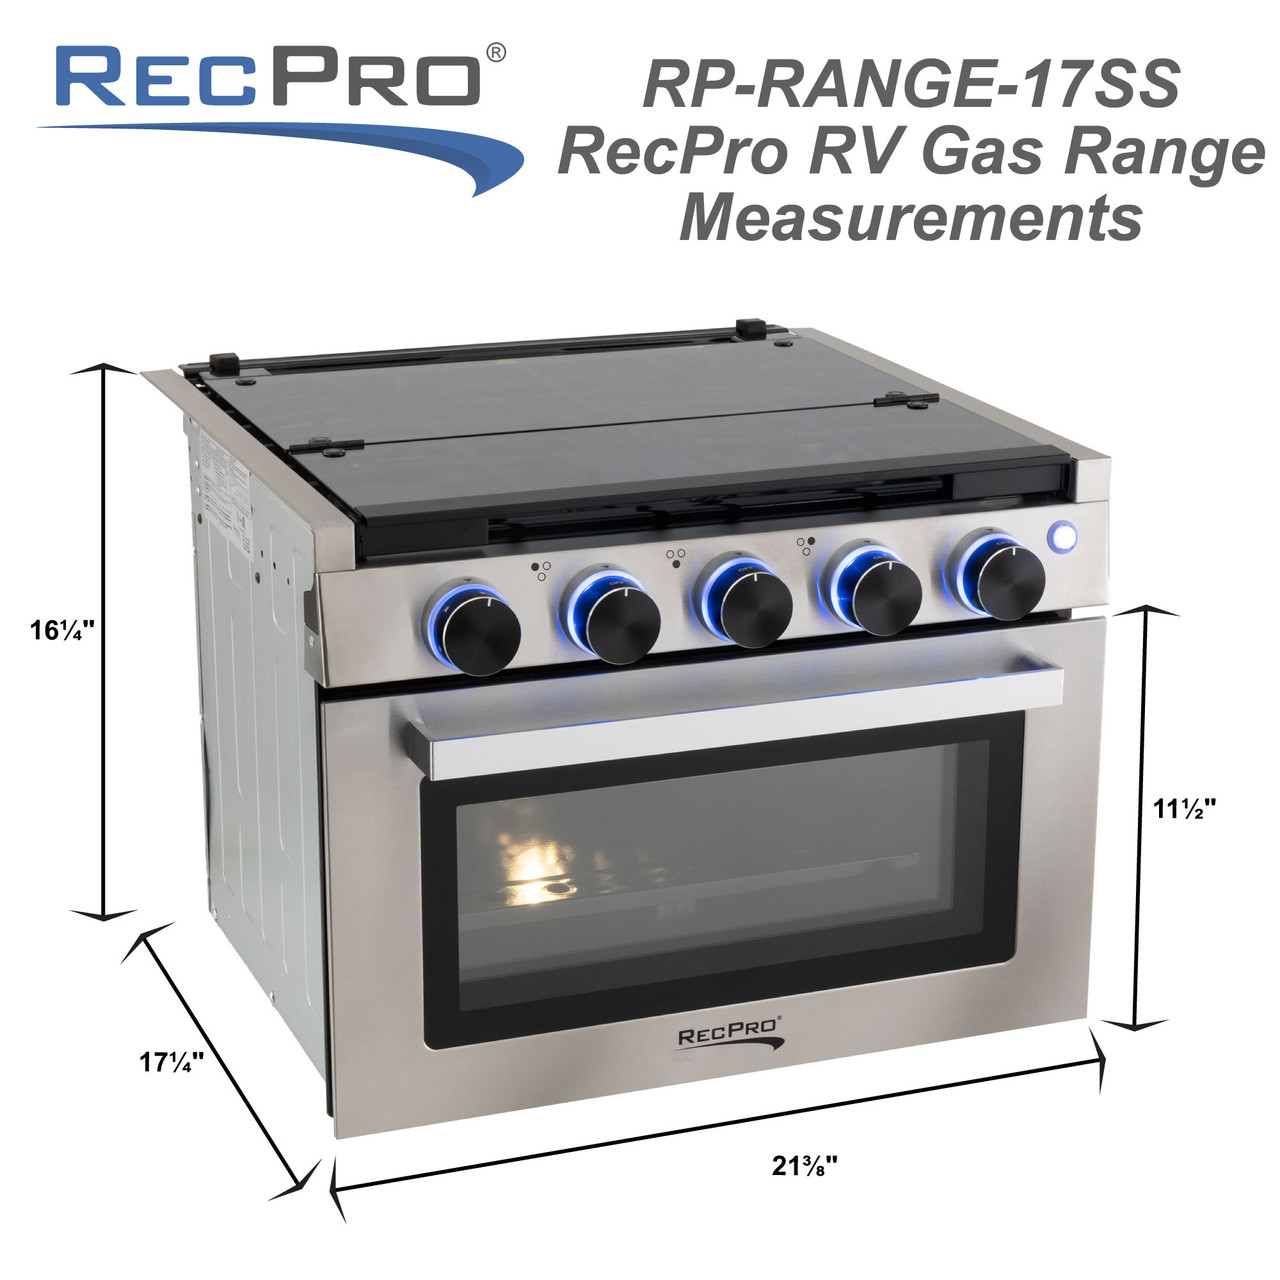 RecPro RV Built in GAS Cooktop 3 Burners RV Cooktop Stove 6,500 and 8,000 BTU Burners Cover Included